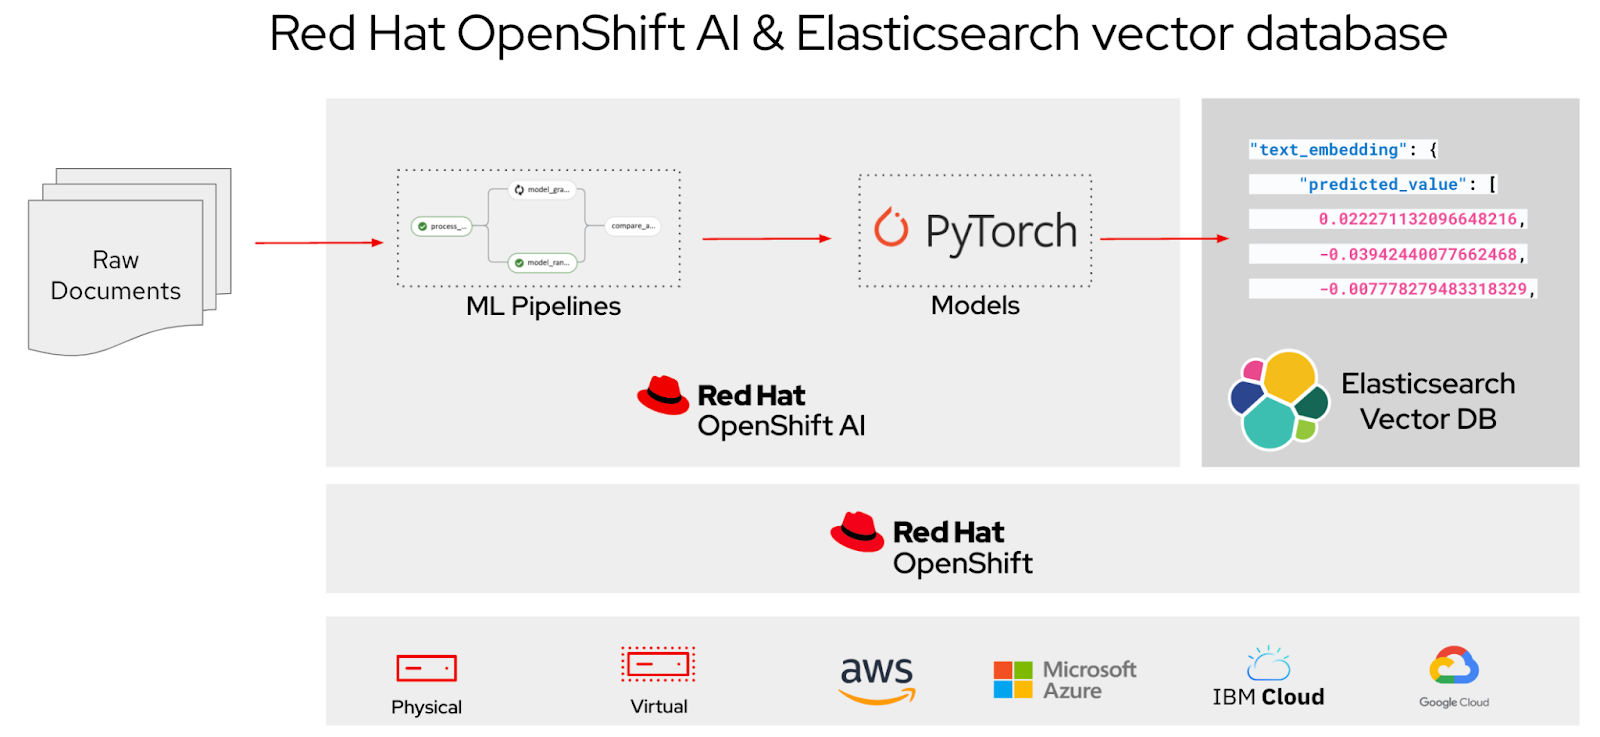 Elasticsearch as the preferred vector database solution on Red Hat OpenShift AI